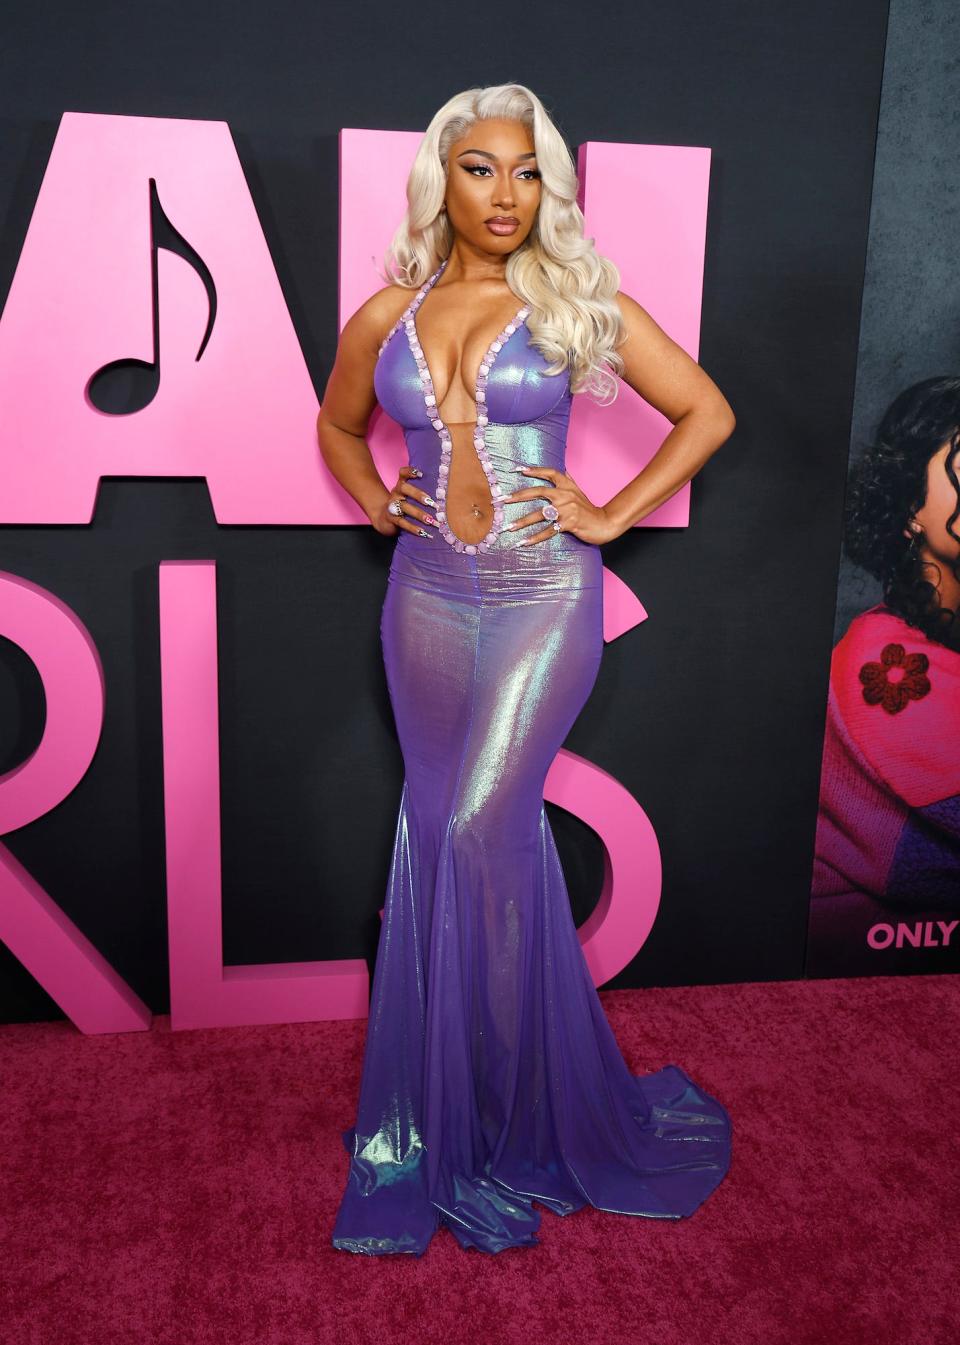 Megan Thee Stallion attends the "Mean Girls" premiere.